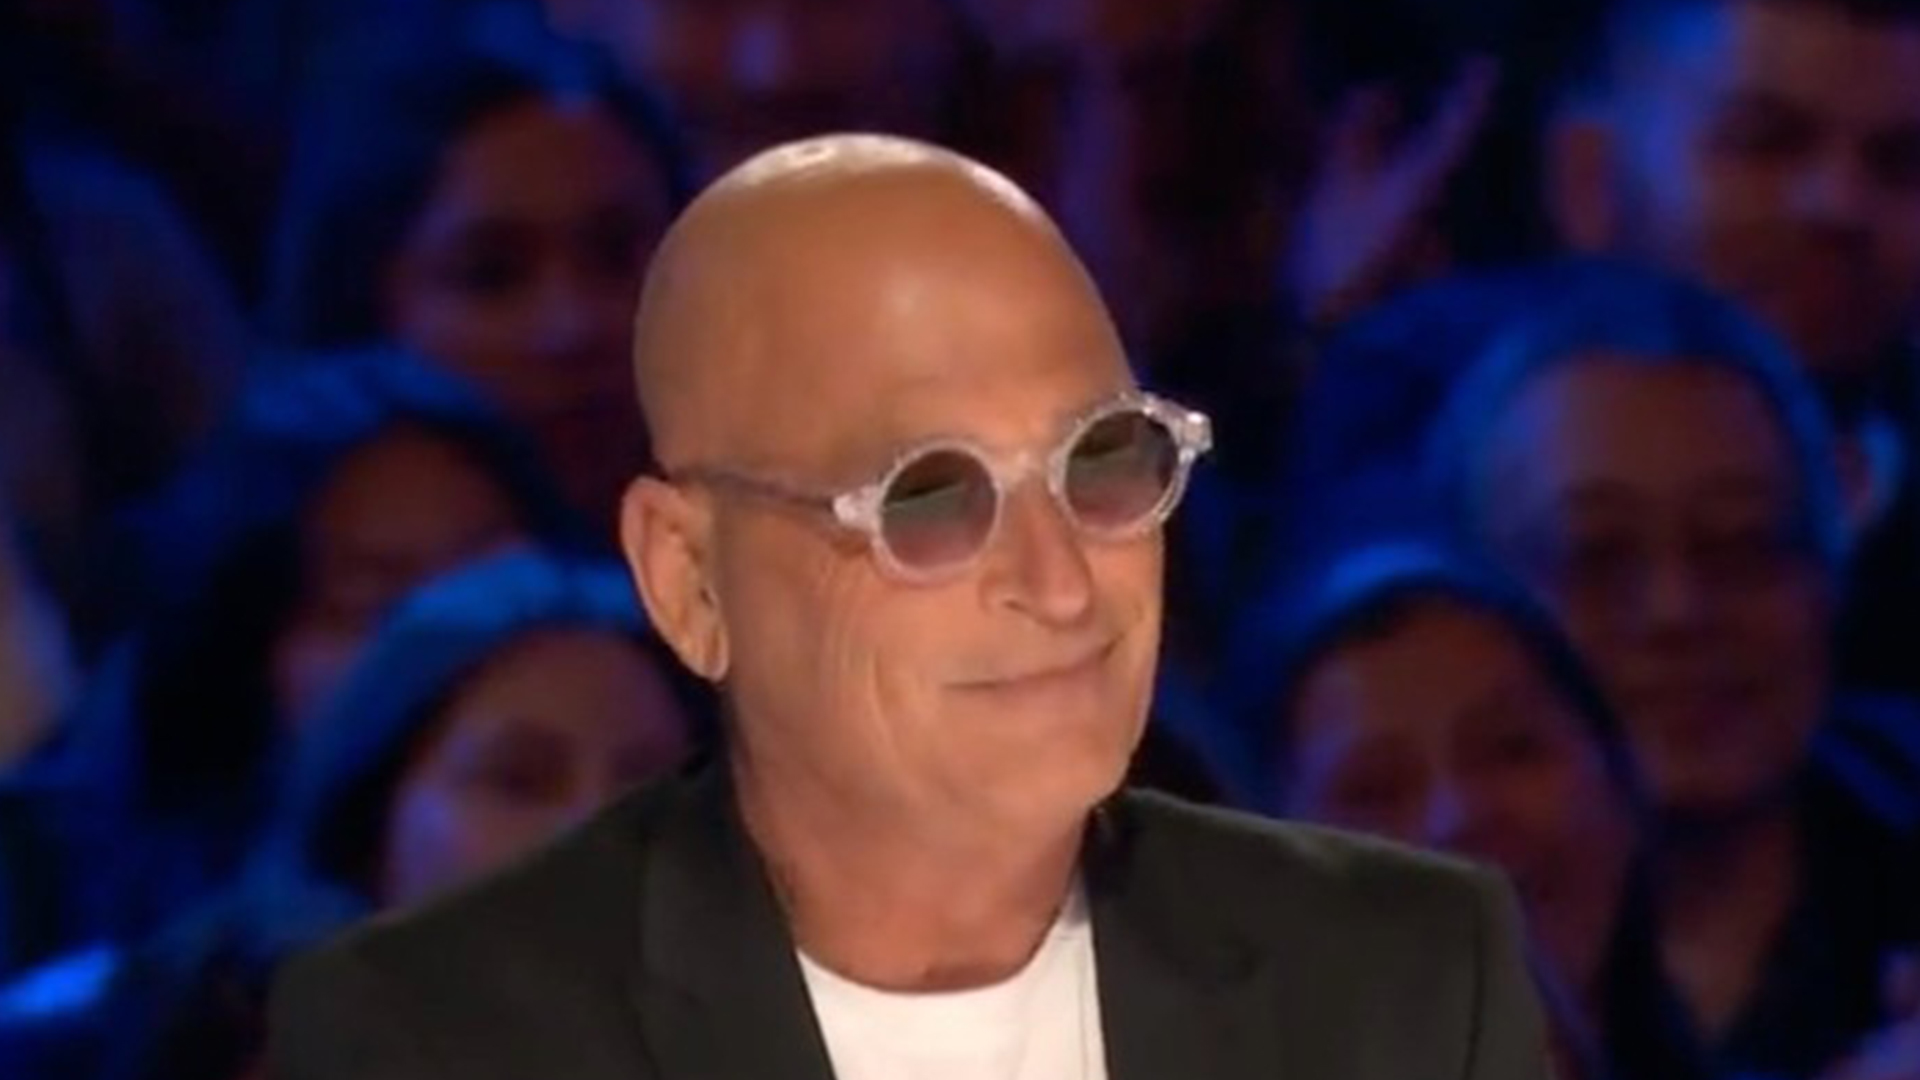 AGT fans fear for Howie Mandel after his eye appears swollen shut in concerning new video